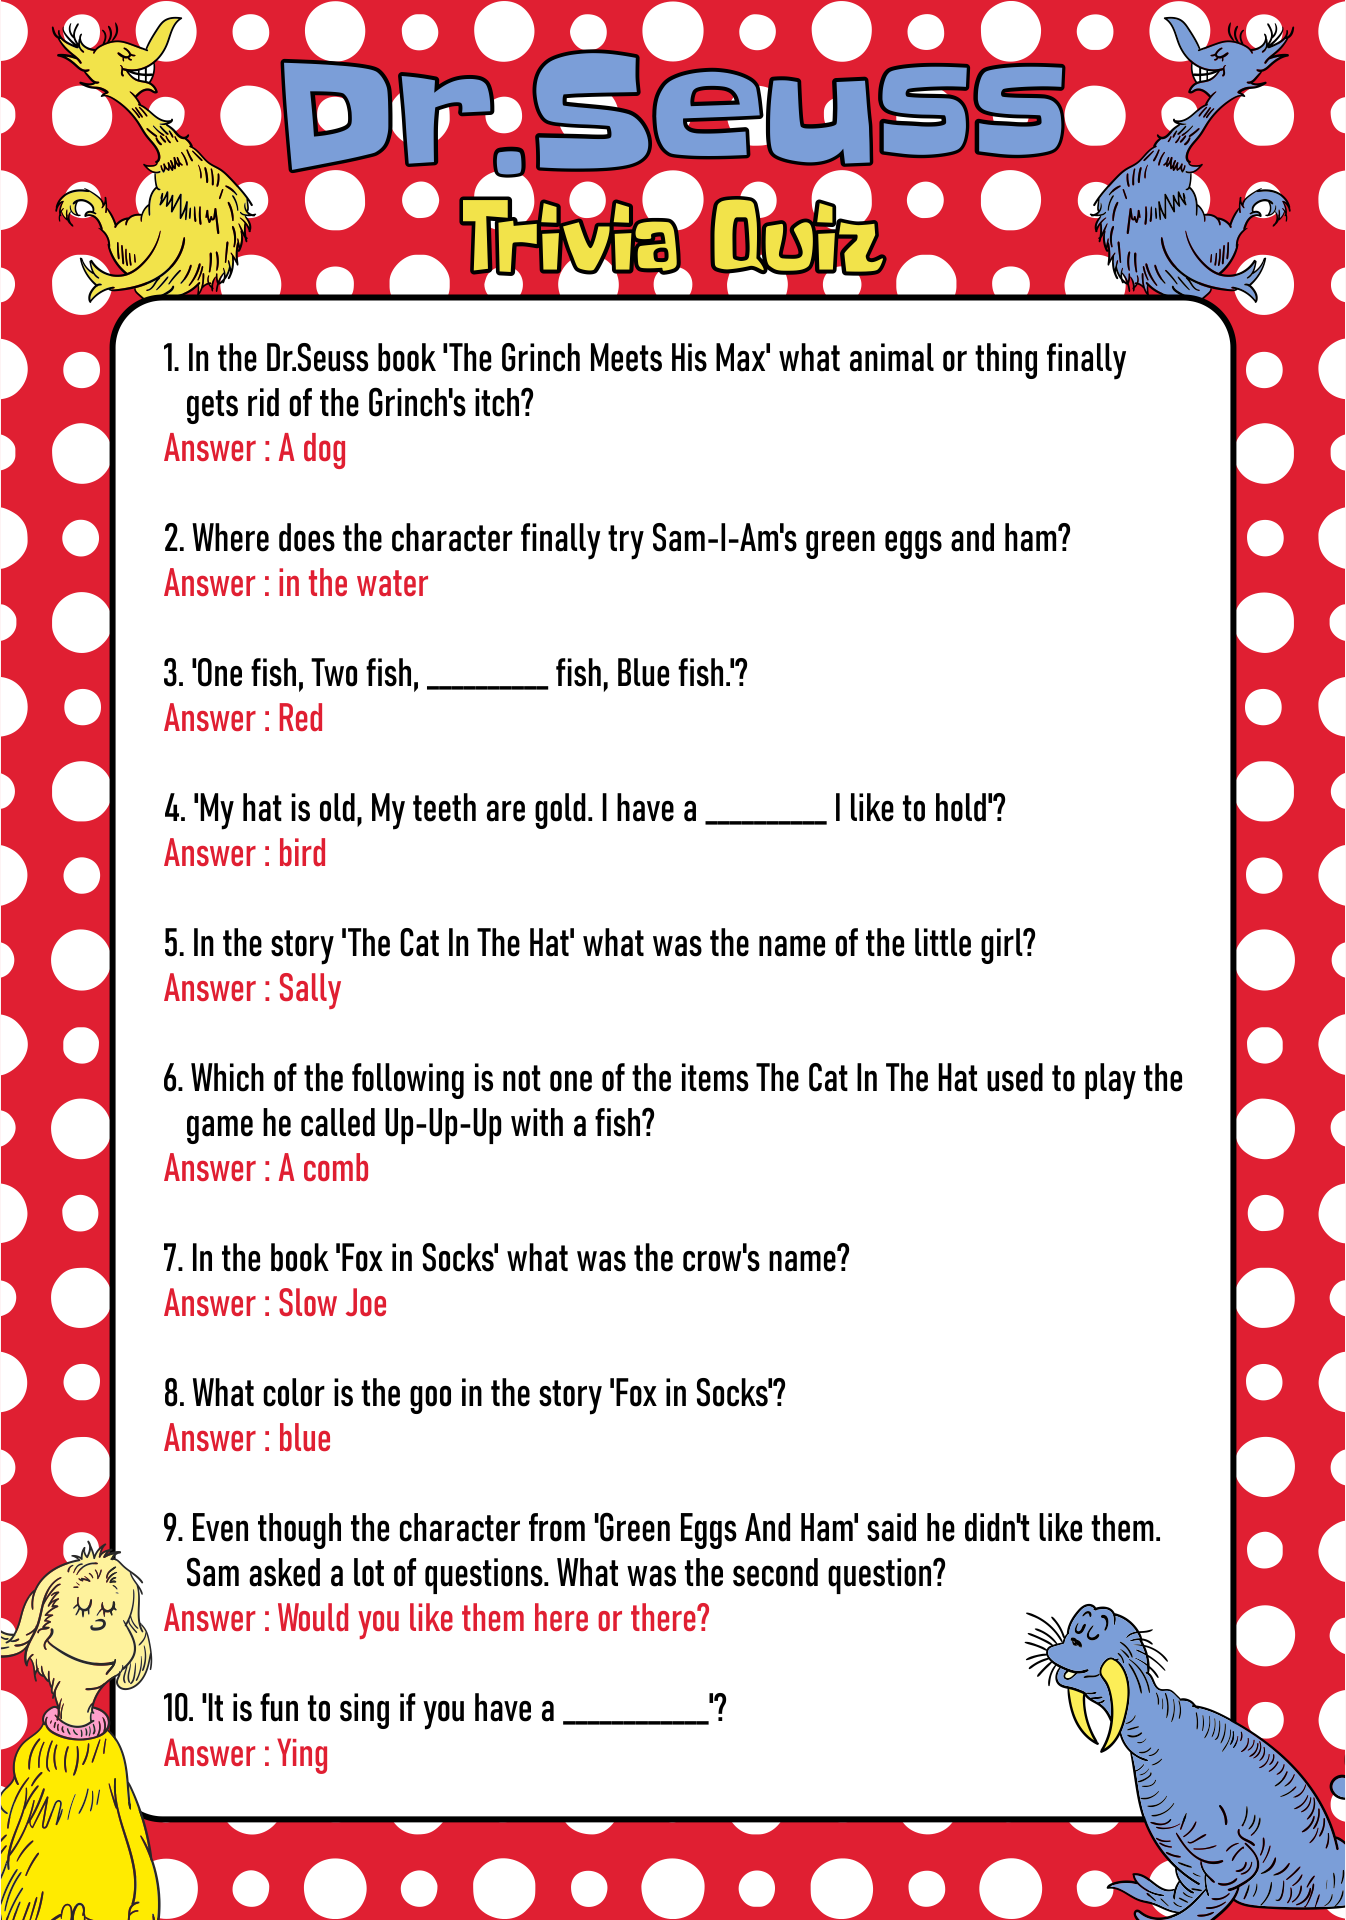 Fun Facts About Dr. Seuss